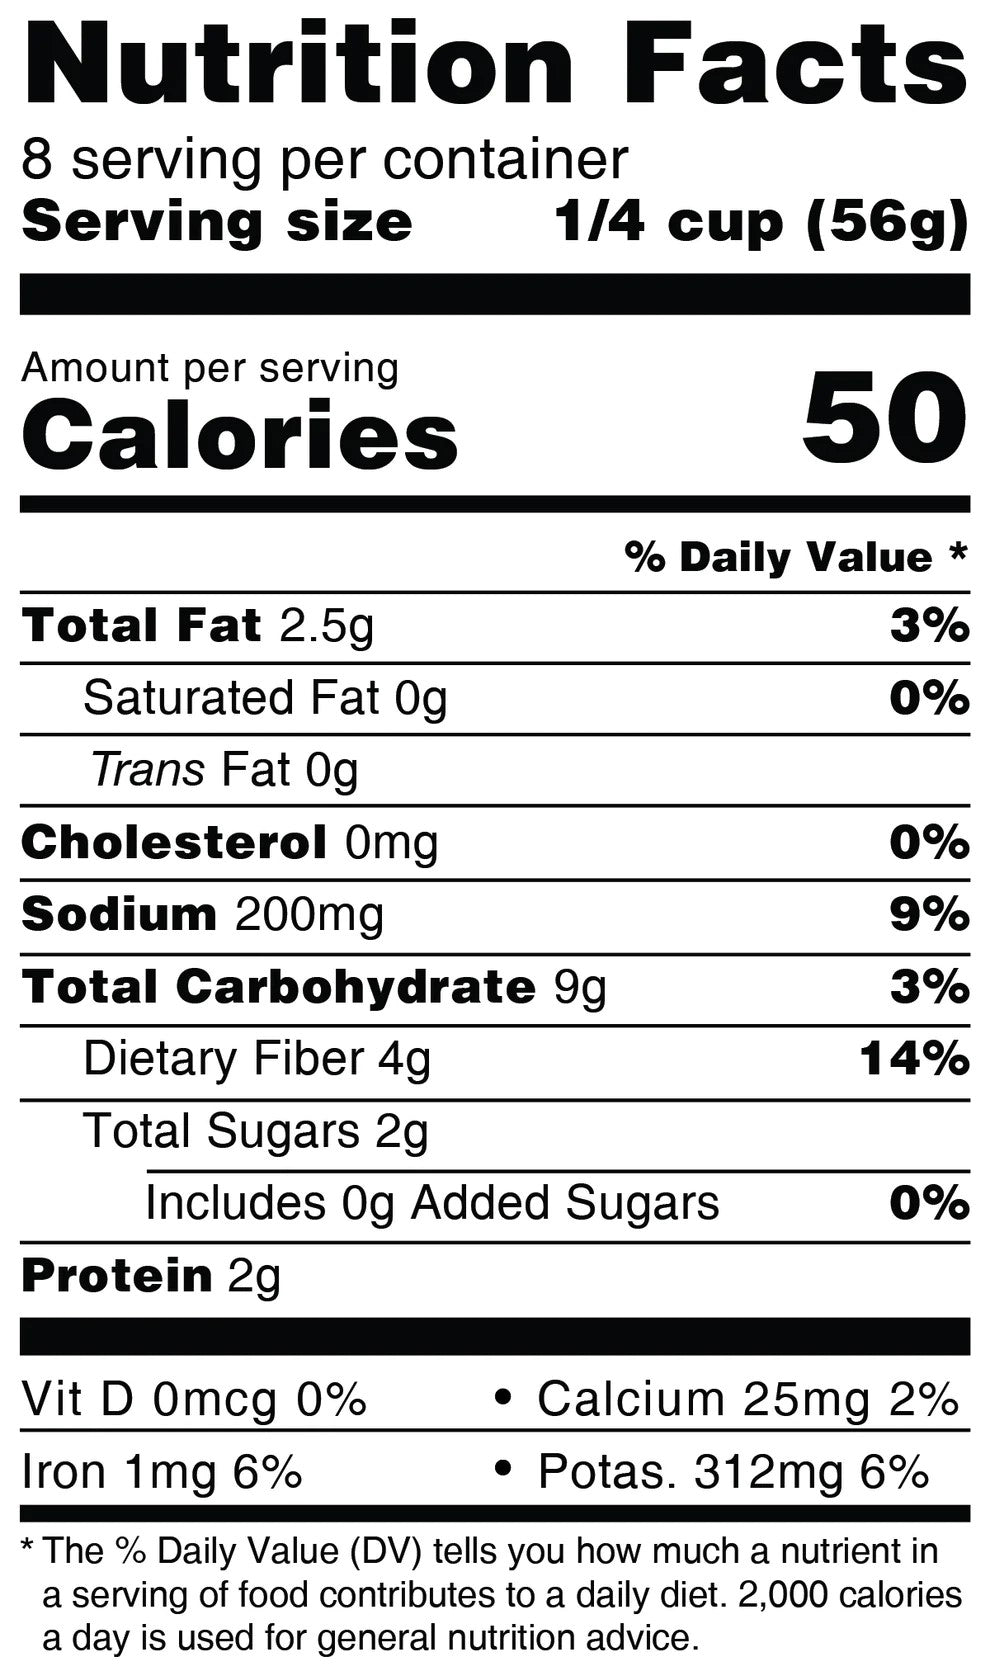 Nutrition facts label showing serving size, calories, and nutrients for a Sun-Dried Red Chile Sauce. Details include calories, fat, cholesterol, sodium, carbohydrates, protein, and mineral content.